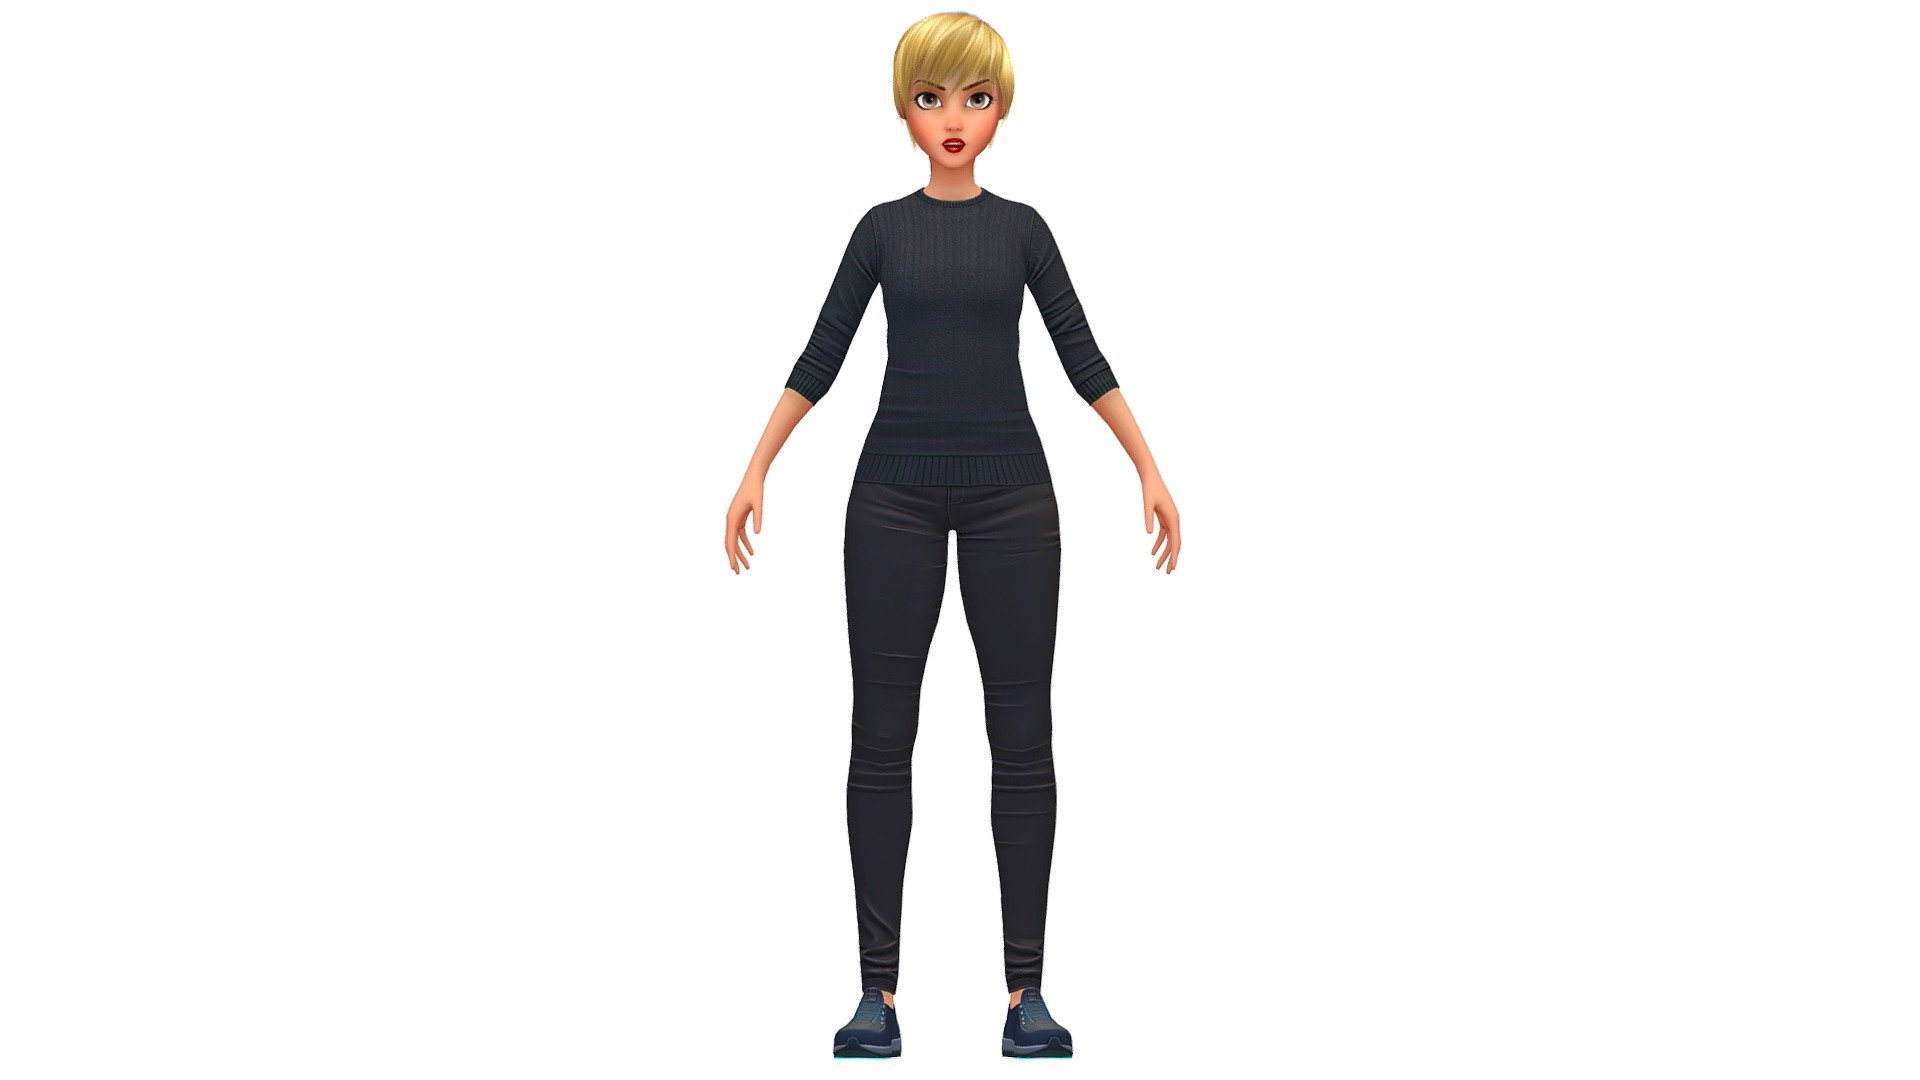 you can combine and match othercombinations using the collection:

hair collection - https://skfb.ly/ovqTn

clotch collection - https://skfb.ly/ovqT7

lowpoly avatar collection - https://skfb.ly/ovqTu - Cartoon Low Poly Style Girl Avatar 1 - Buy Royalty Free 3D model by Oleg Shuldiakov (@olegshuldiakov) 3d model